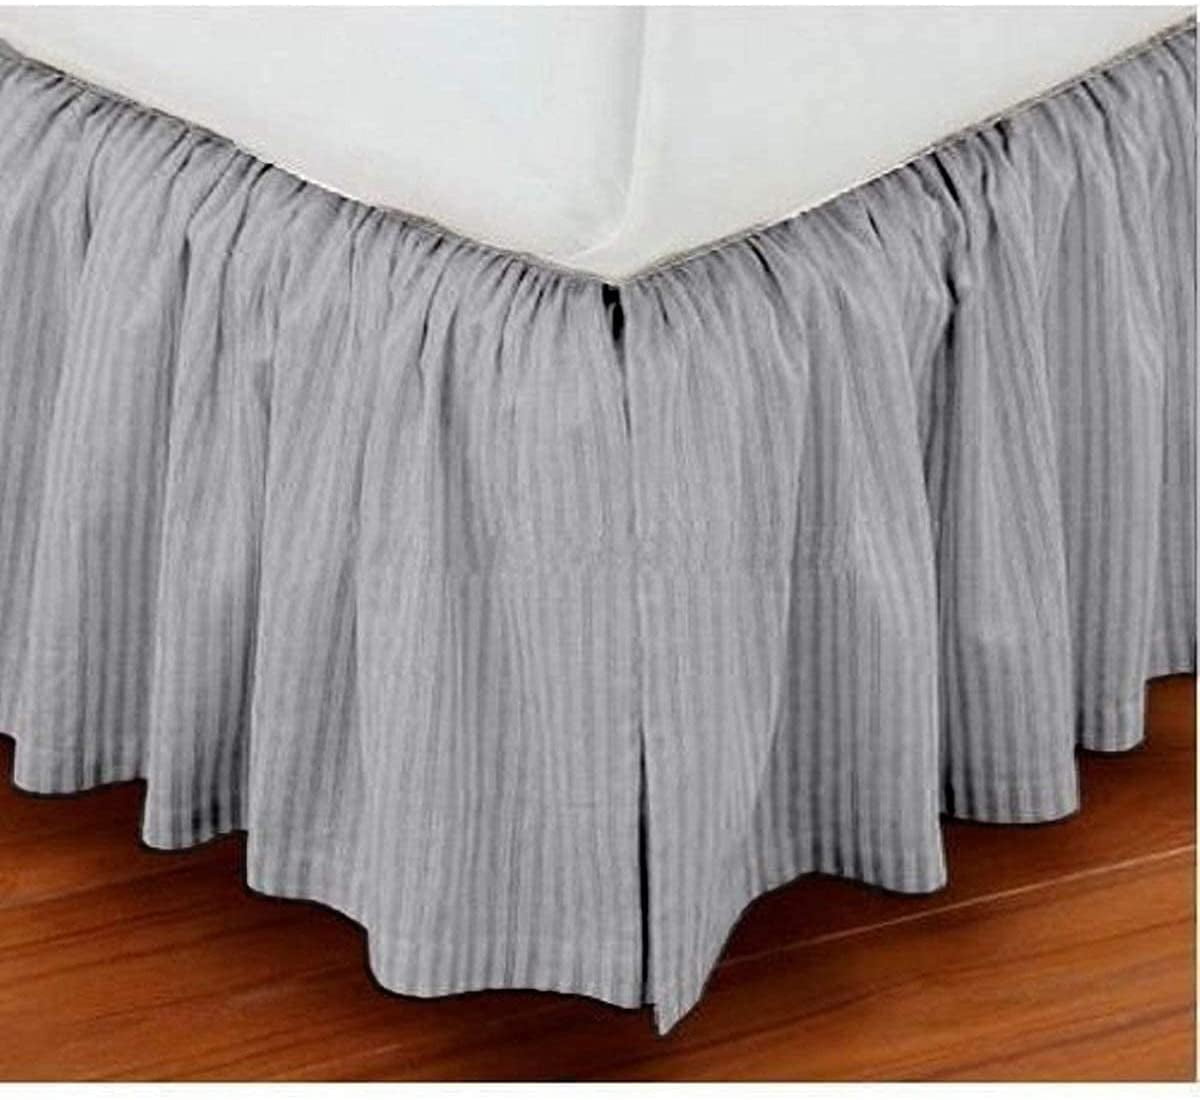 Dust Ruffle Bed Skirt/Bed Cover 25" drop 800 TC Egyptian Cotton ALL SIZE &COLOR 